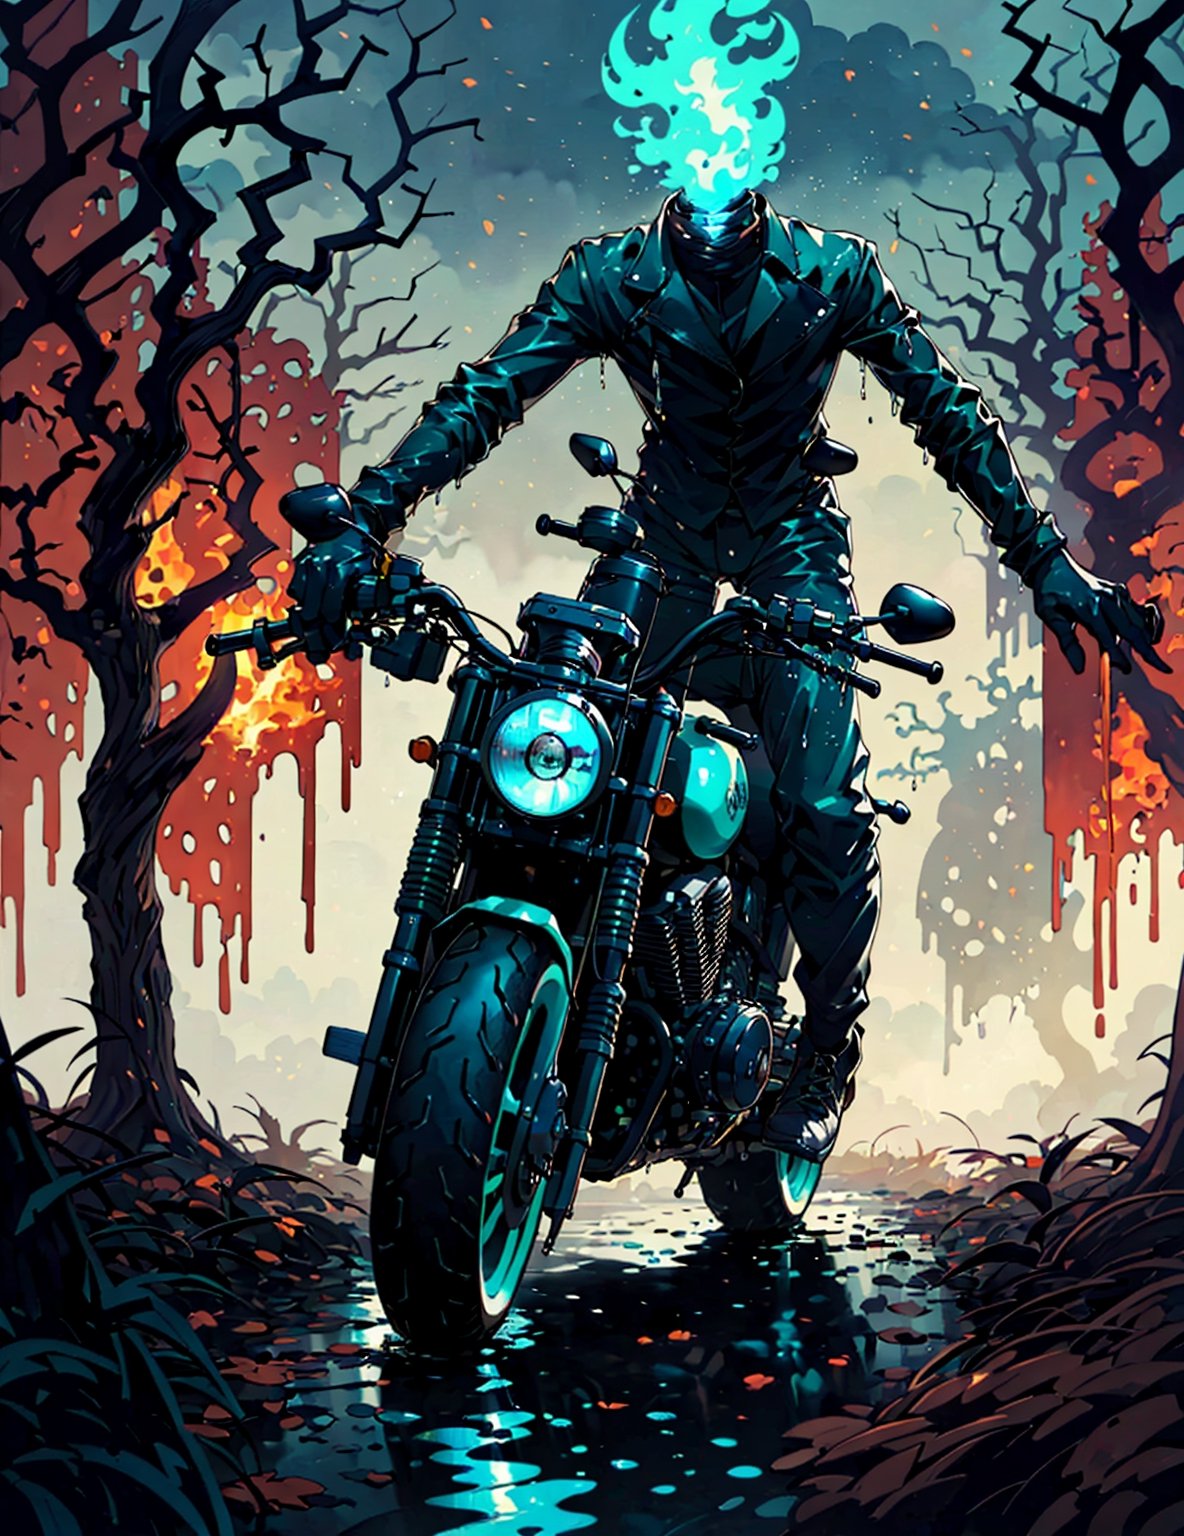 (((a headless horseman))) he rides a burning 1930 Harley Davidson motorcycle down a wooded highway on a dark night. Wearing a leather jacket,(((No head)))(((decapitated)))(((headless)))(((no helmet)))(((empty neck hole)))(((The motorcycle has the an iron horse head welded to the front, it's eyes serve as headlights))),(holding a machete)

 (((Drippy, burnt ember asthetic))), ((gnarly spooky trees)), autumn leaves, (((green fog))), crescent moon, weird mushrooms, 

(((an iron horse head is welded on to the front of motorcycle, (rider has no head, he is decapitated, he is headless),))),halloweentech,art by Stephen Gammell,fire that looks like...,HellAI,horror